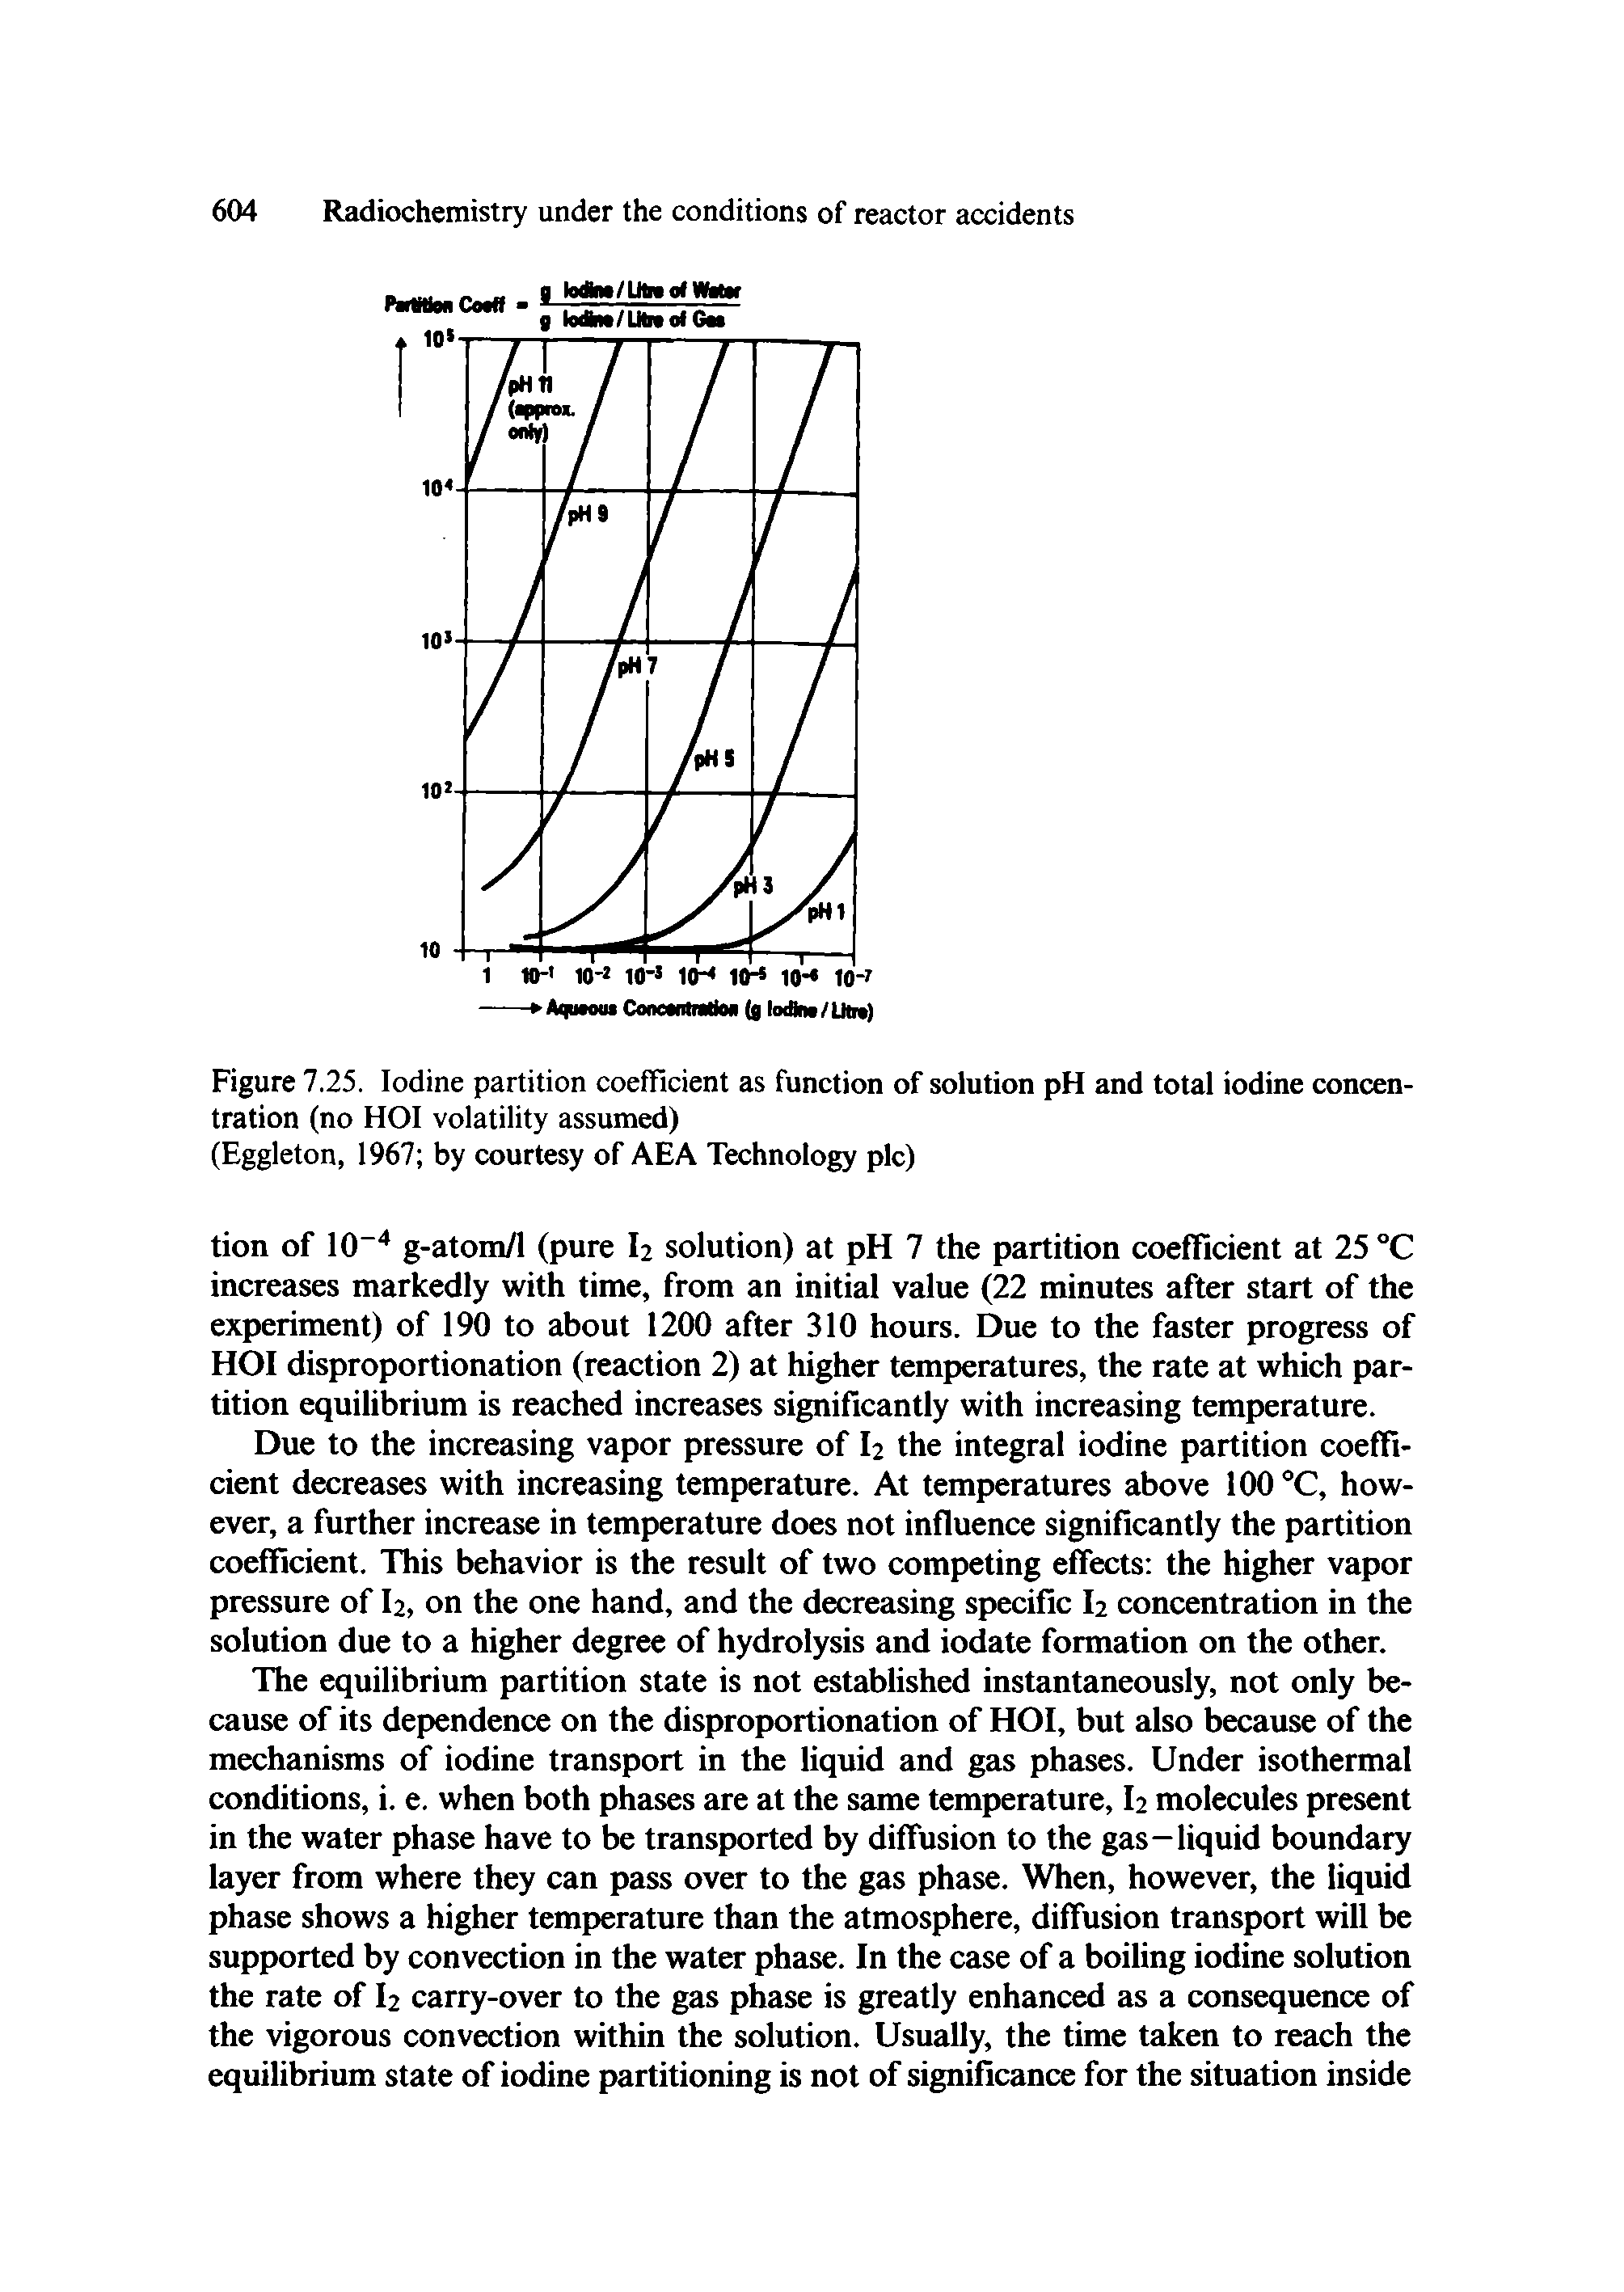 Figure 7.25. Iodine partition coefficient as function of solution pH and total iodine concentration (no HOI volatility assumed)...